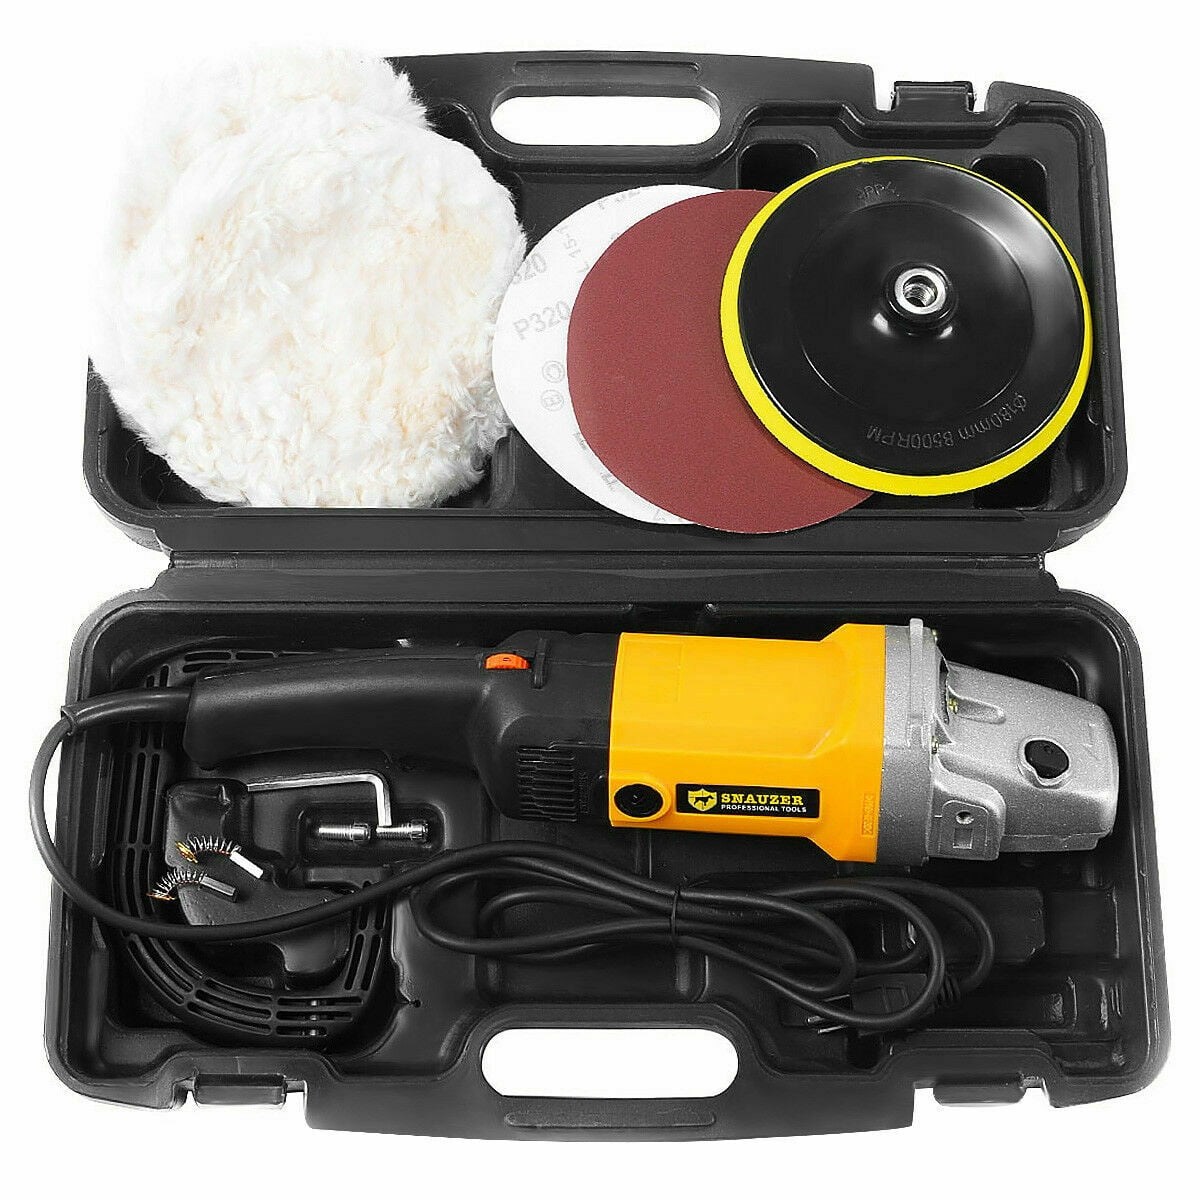  Buffer Polisher, 6-inch Electric Variable Speed Car